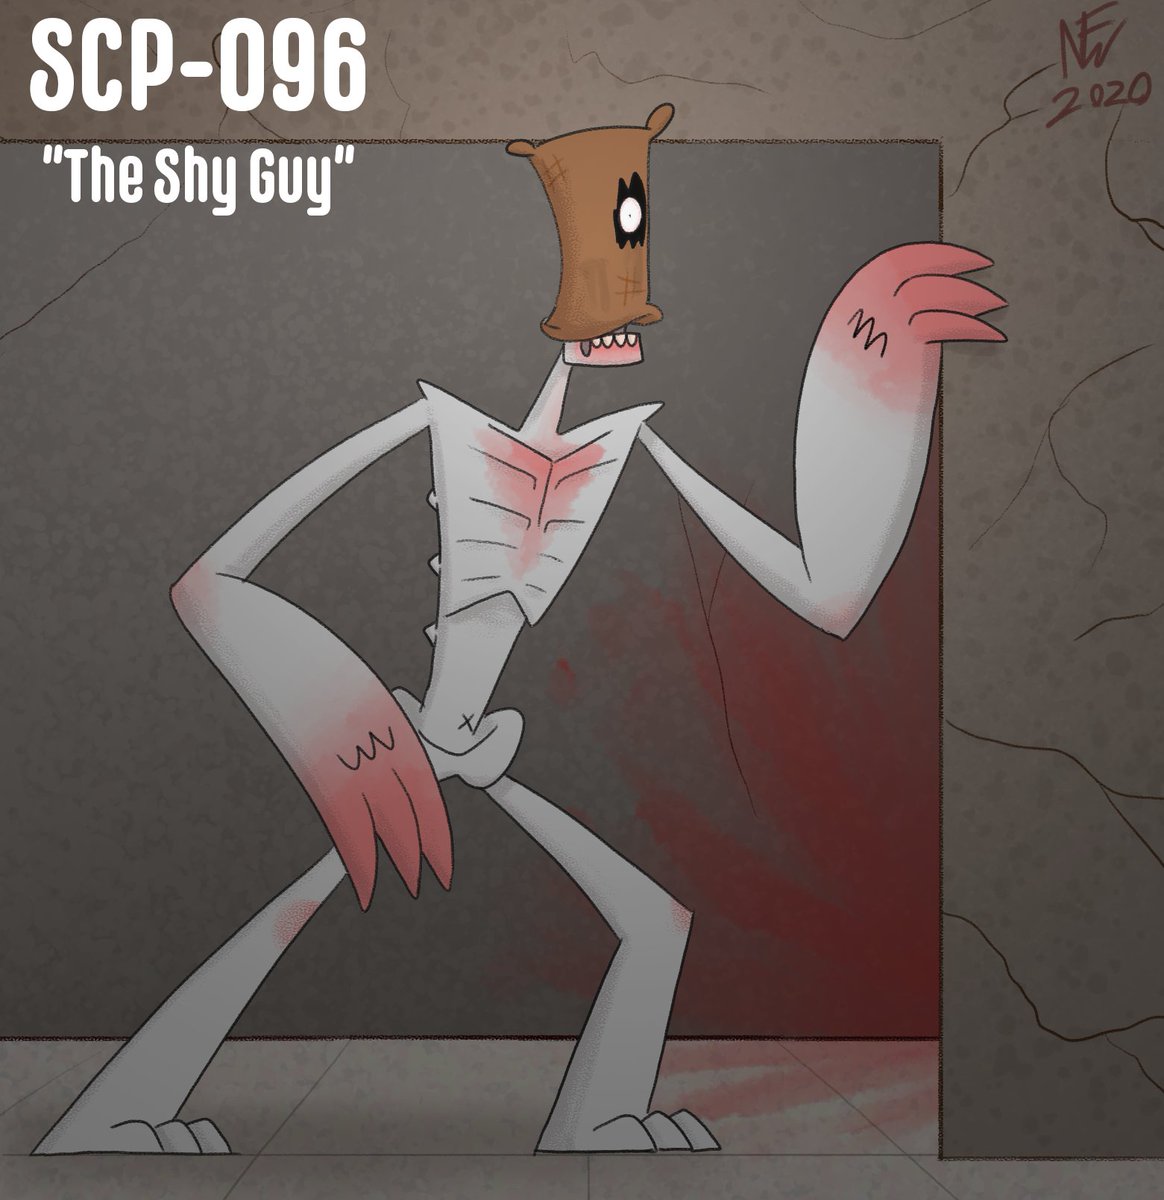 Hashtag Scp096 Sur Twitter - scp 096 the shy guy roblox